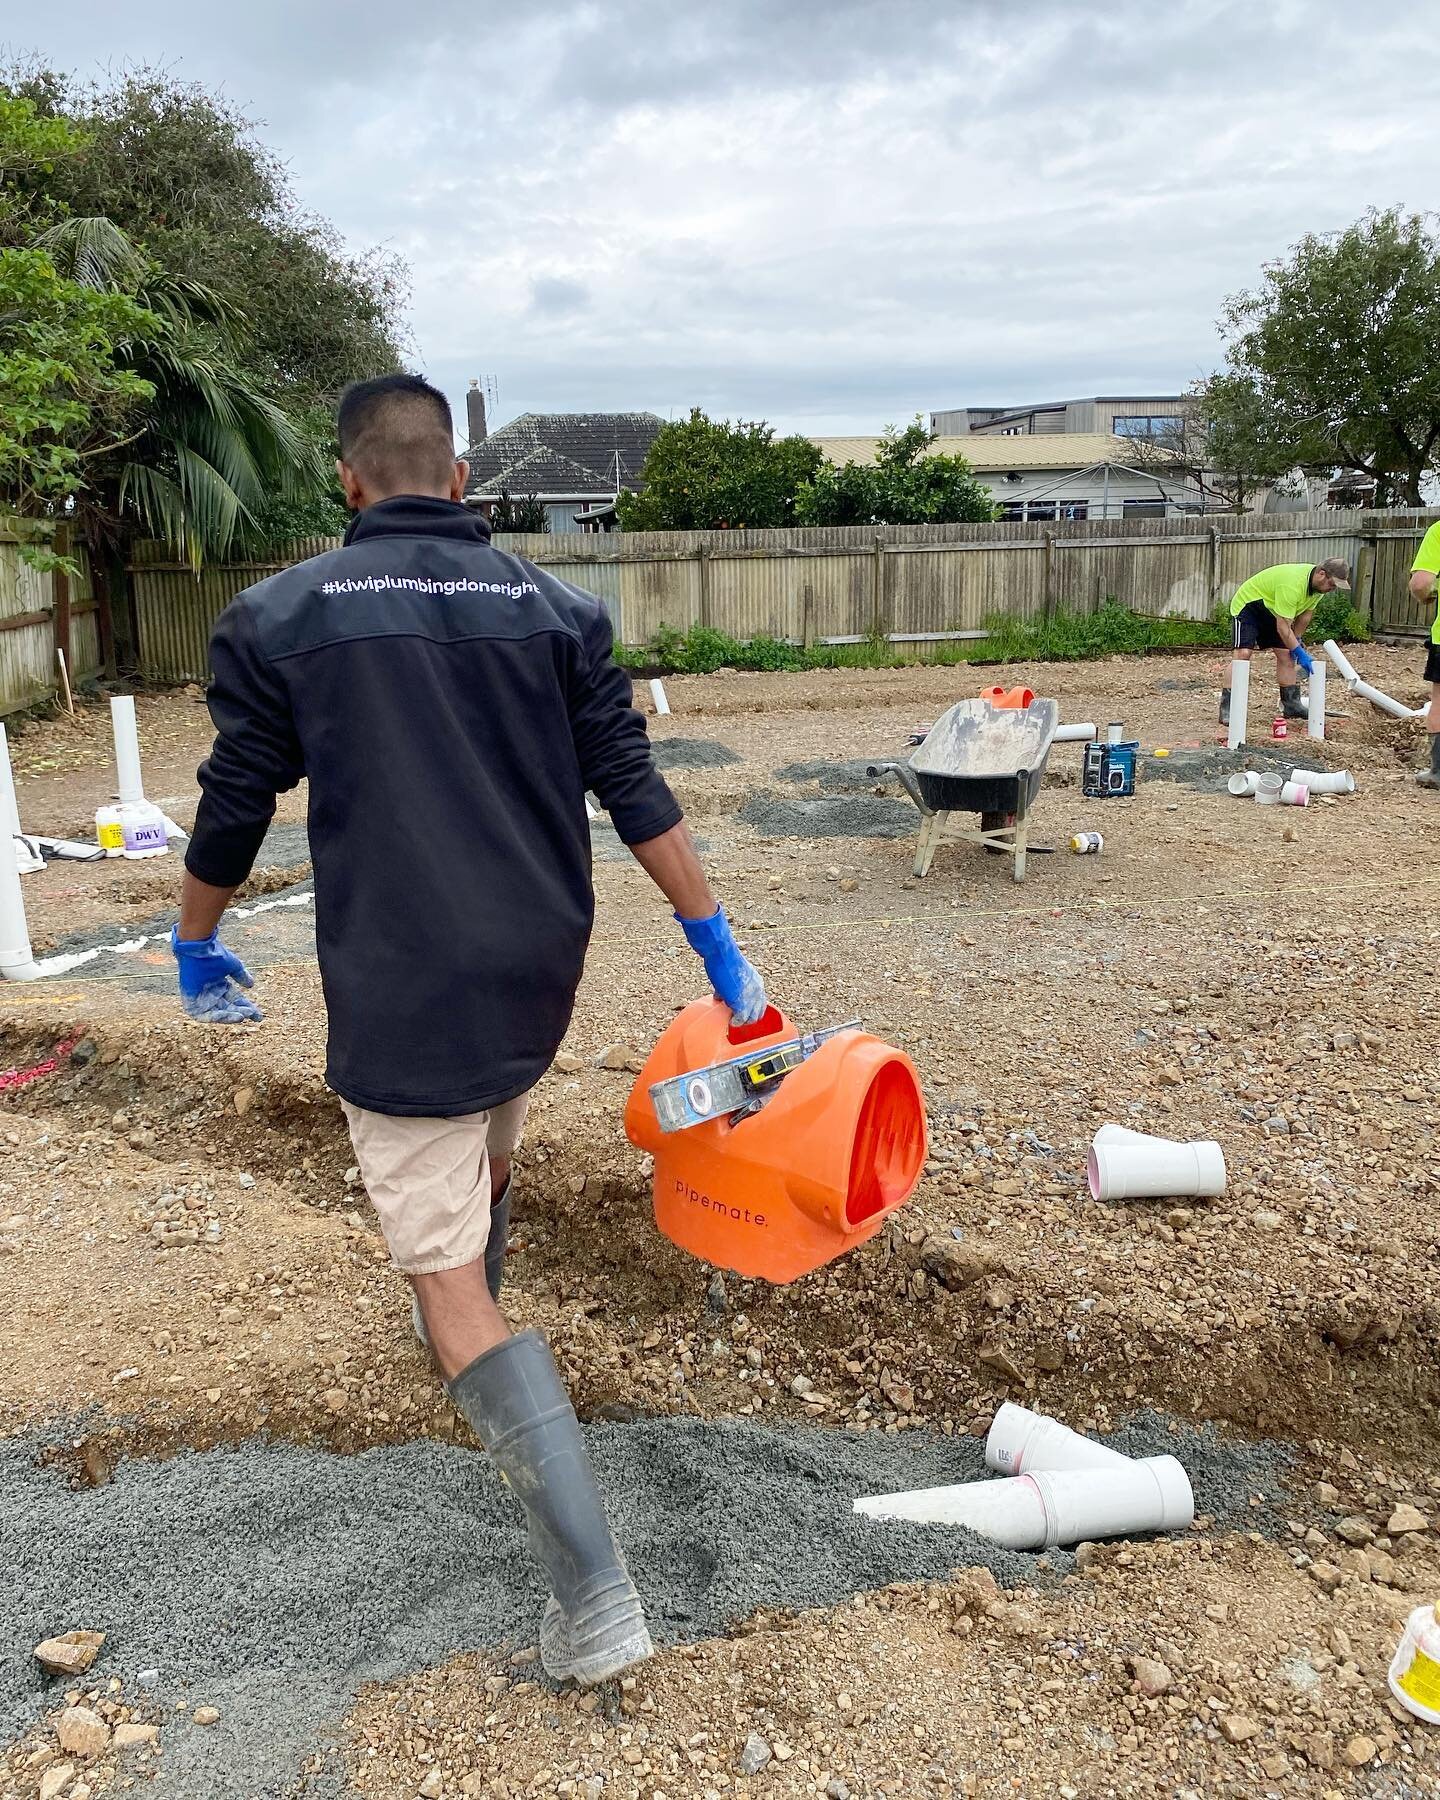 The boys are loving their @pipemate_ltd 
Makes cutting pipe so easy, and is handy to carry your tools around in 🛠

#kiwiplumbingdoneright #plumbingnz #plumbersnz